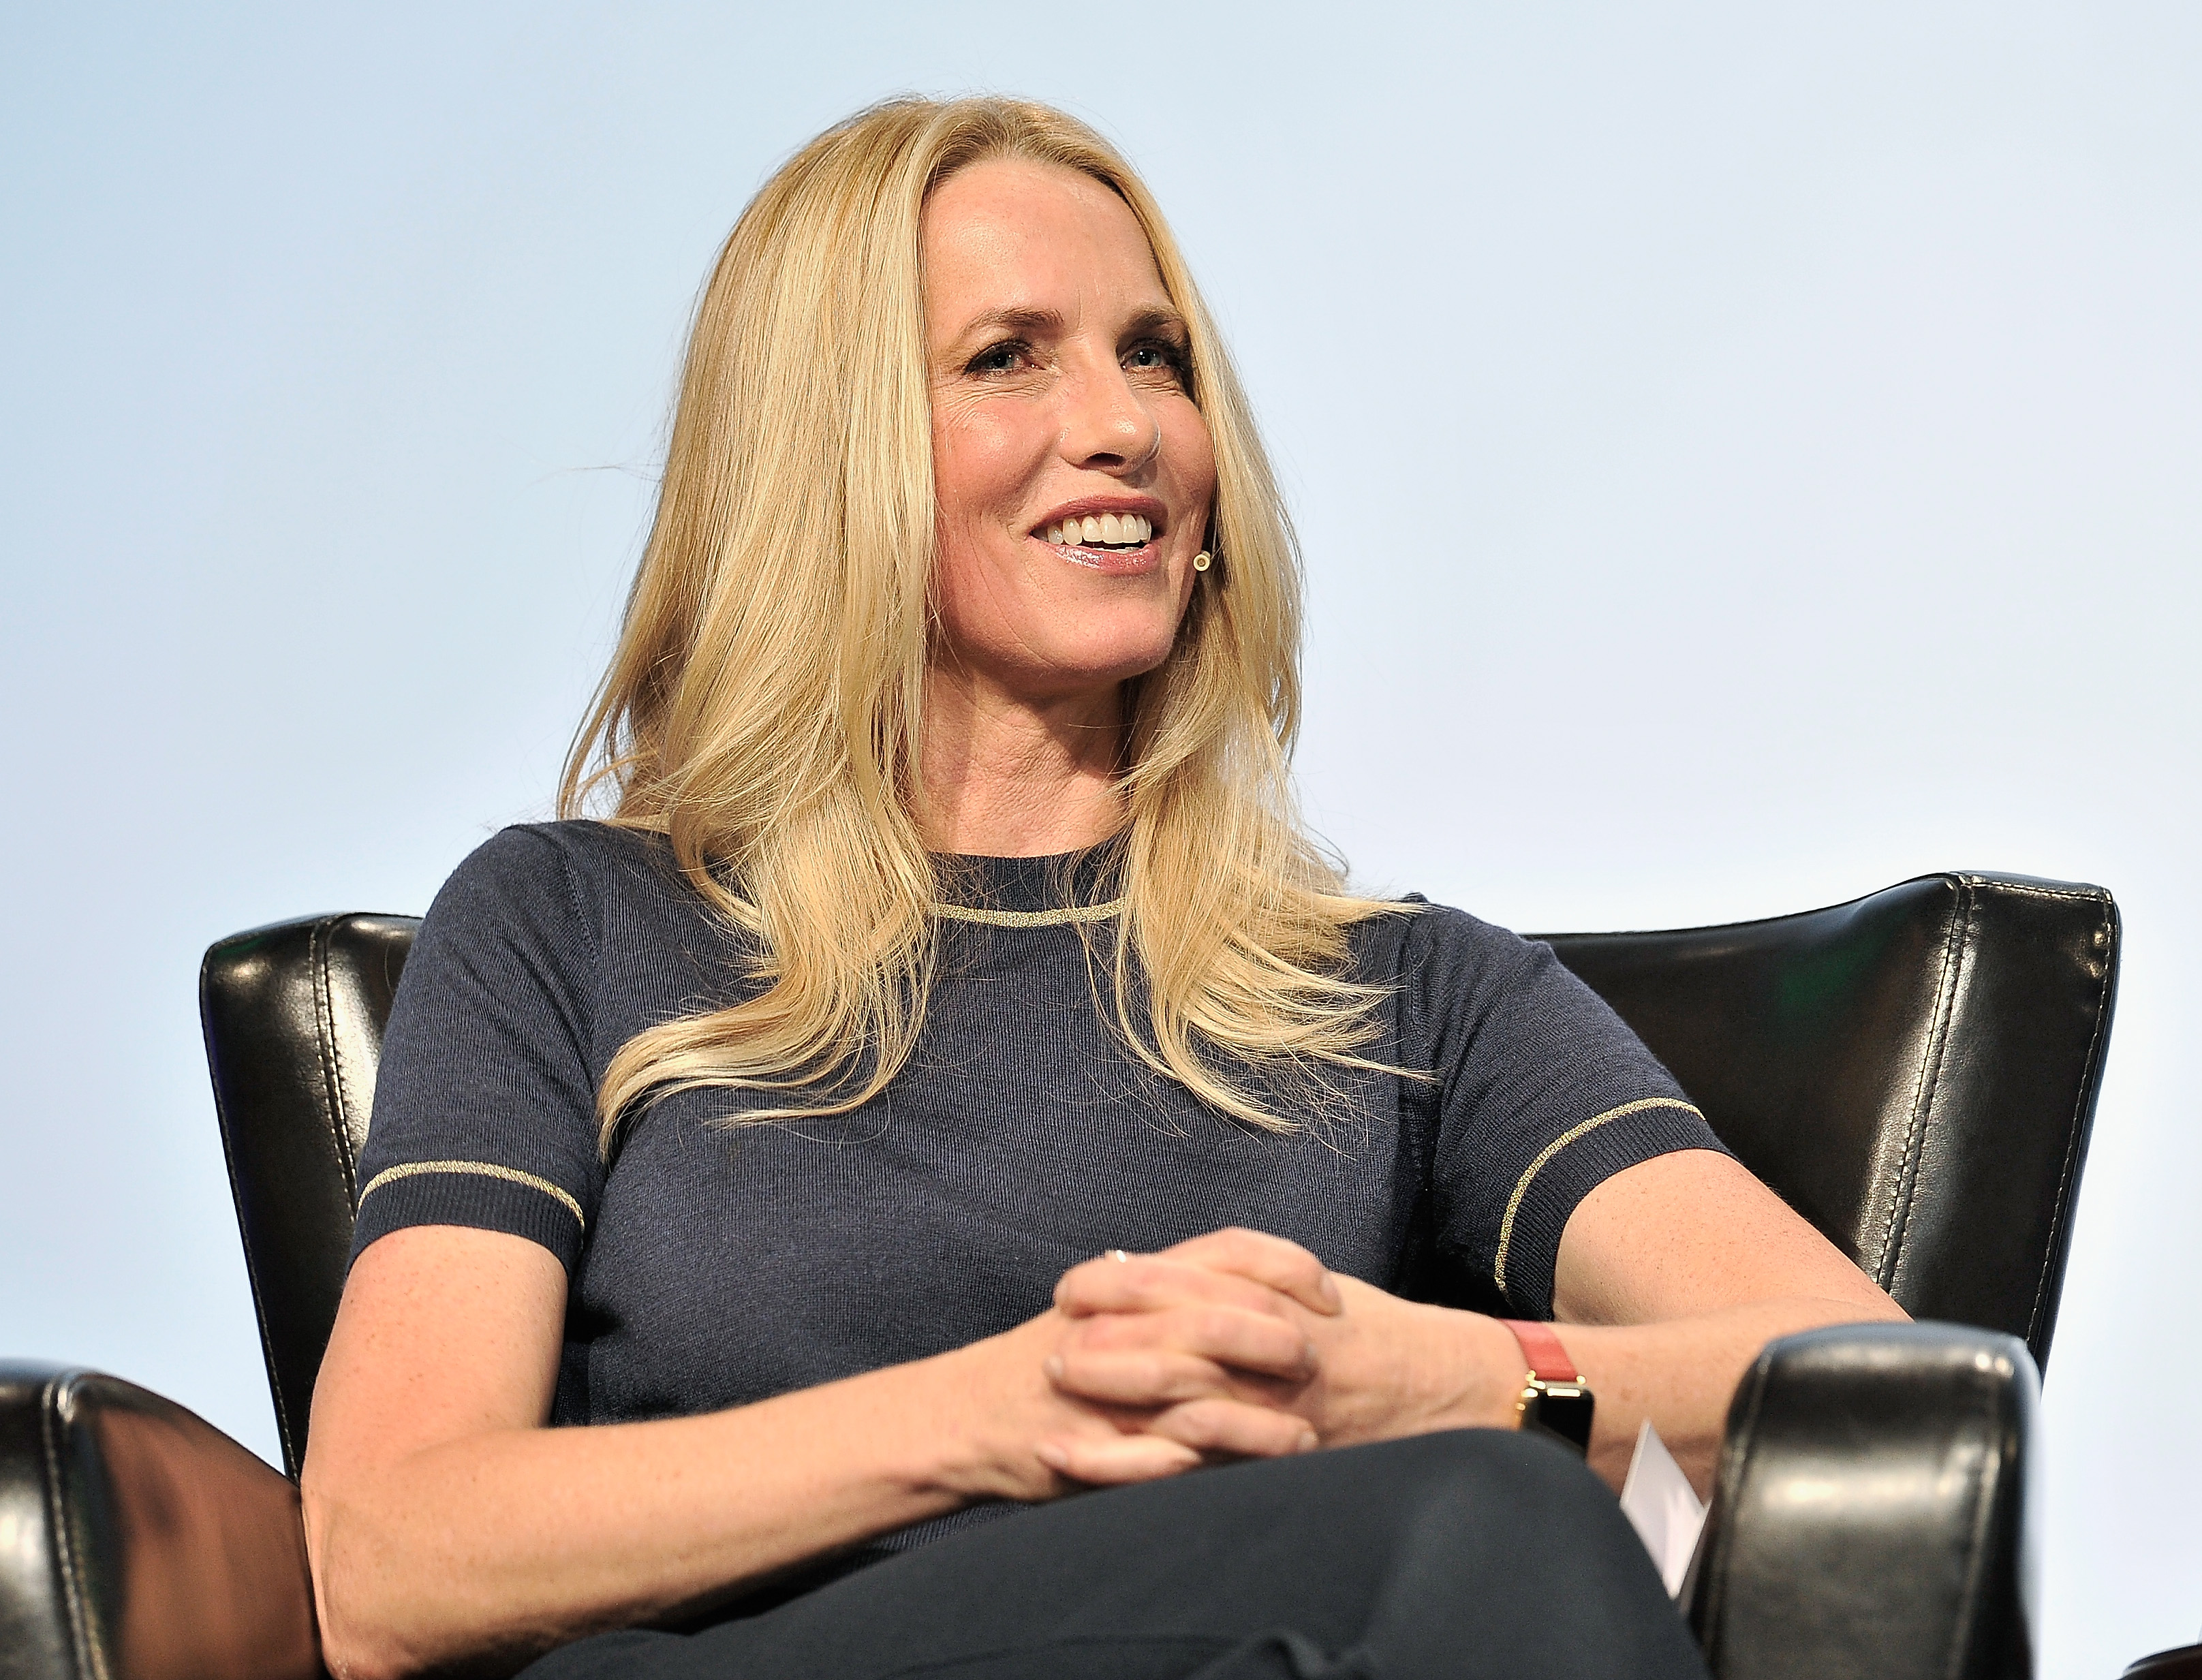 Emerson Collective Founder and President Laurene Powell Jobs speaks onstage during TechCrunch Disrupt SF 2017 at Pier 48 on September 20, 2017 in San Francisco, California. (Steve Jennings—Getty Images for TechCrunch)